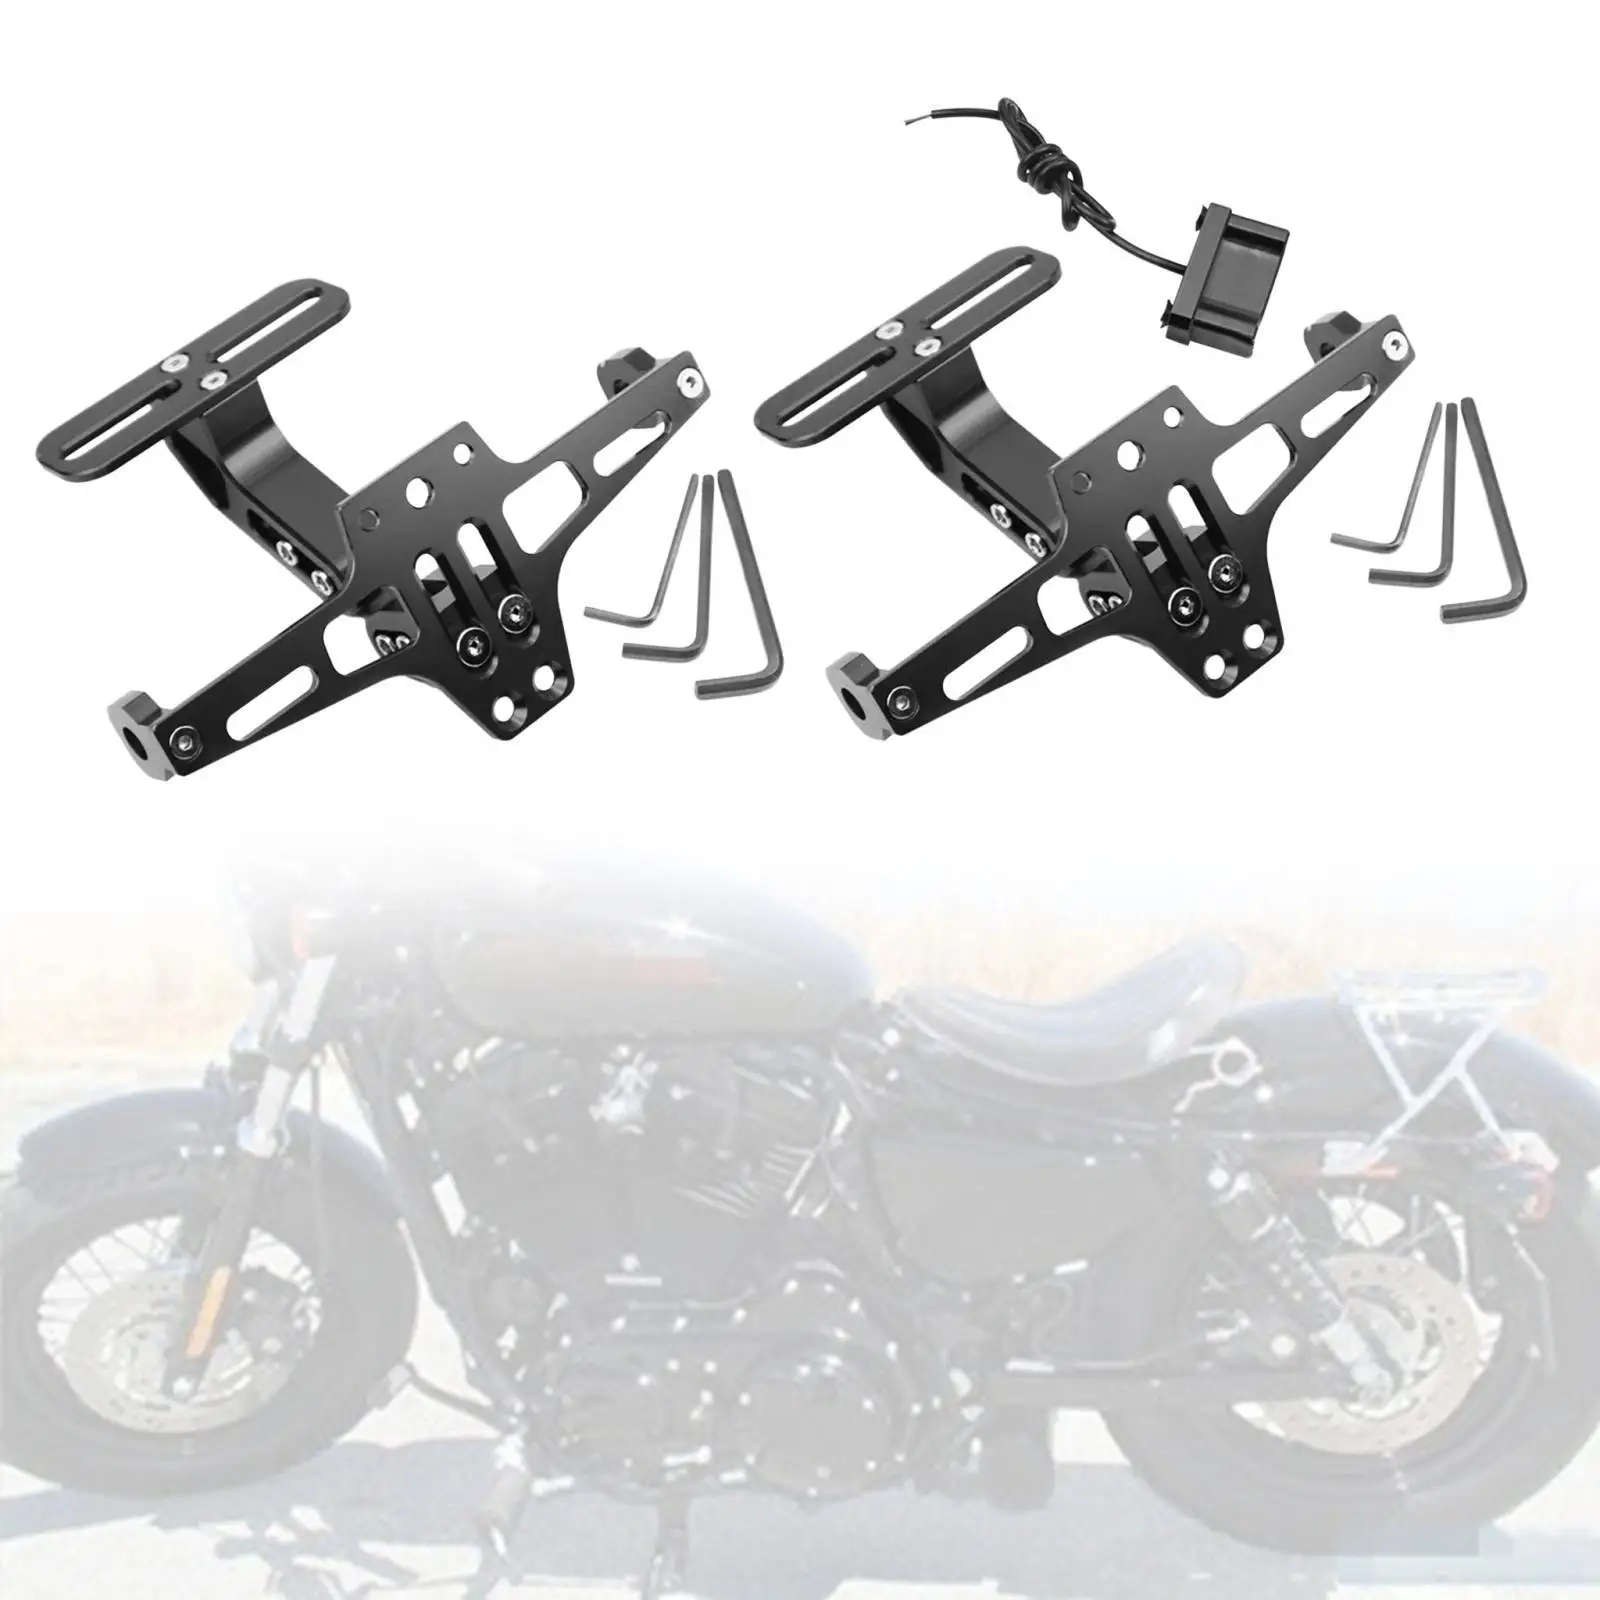 Motorcycle License Plate Bracket Adjustable Angle Motorbike Accessories Easy to